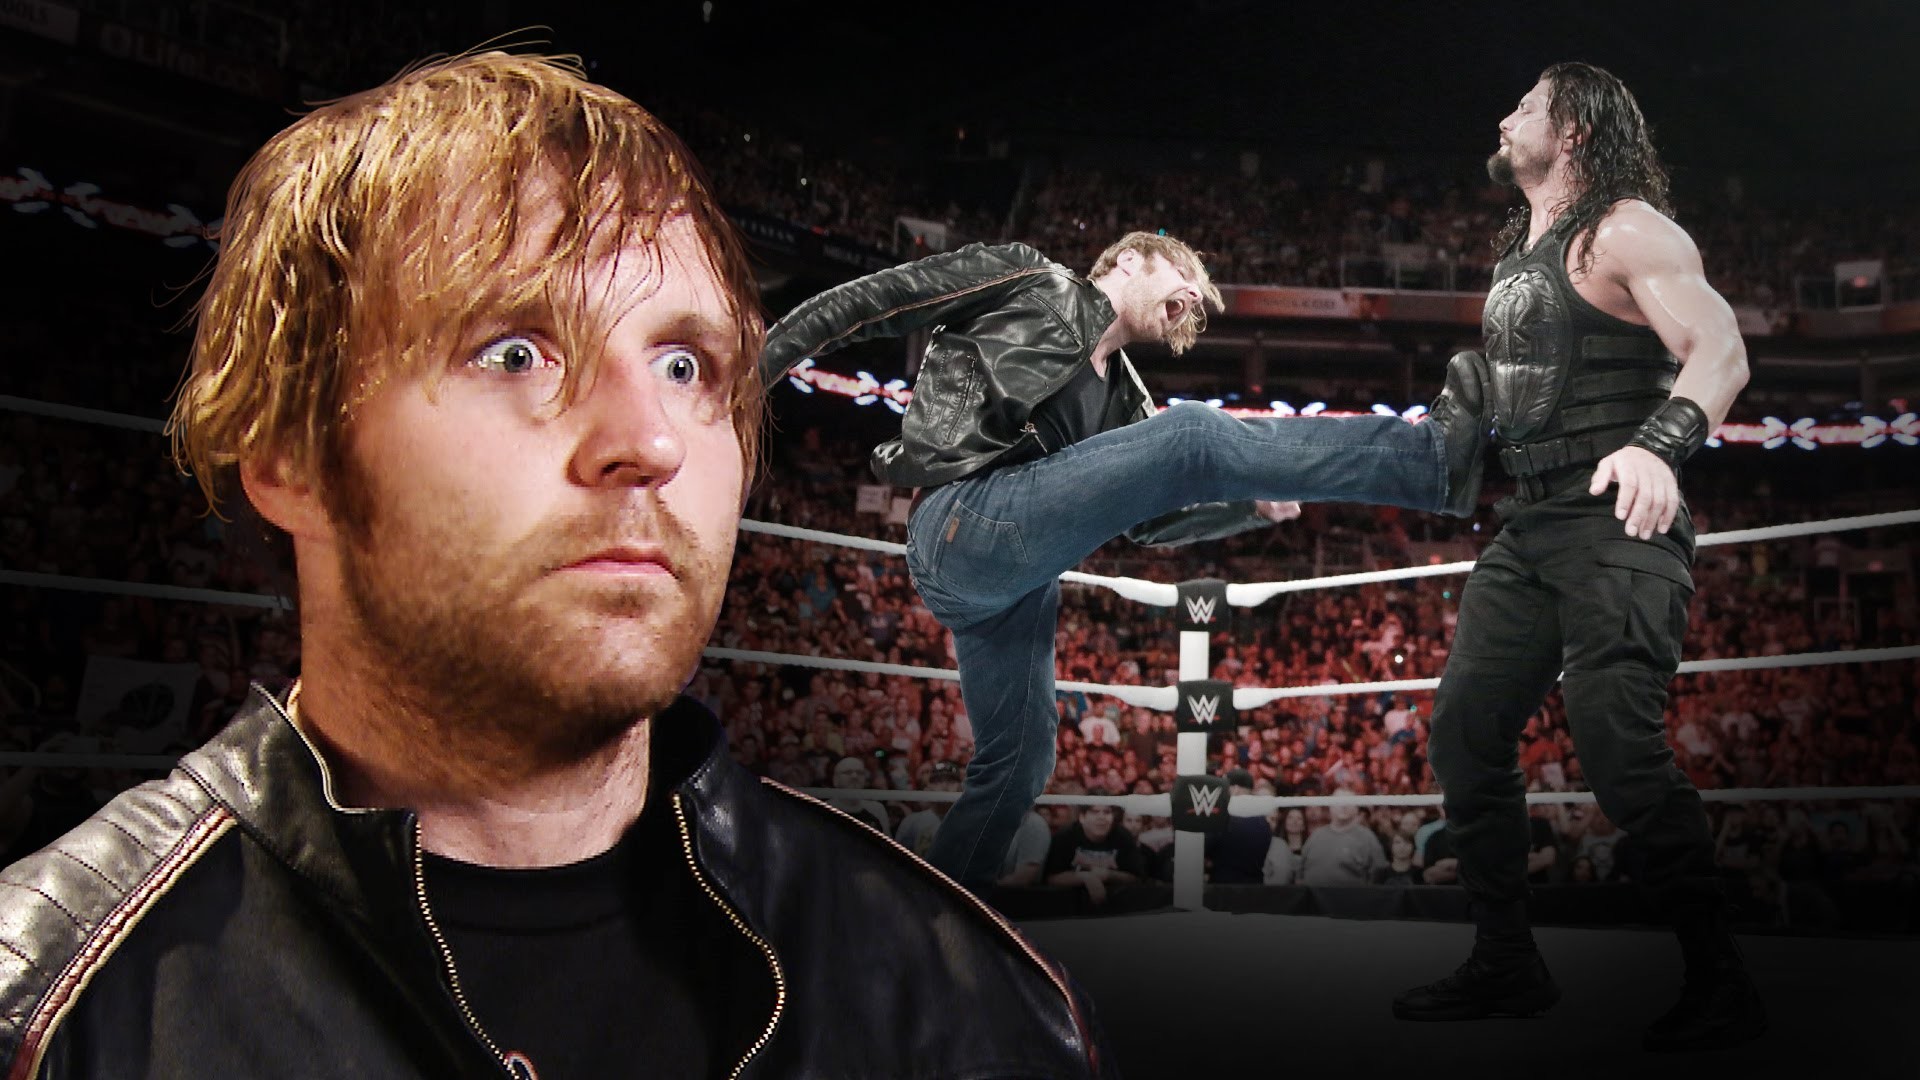 1920x1080 Dean Ambrose on why "it's time to shut some people up": June 22, 2016 -  YouTube